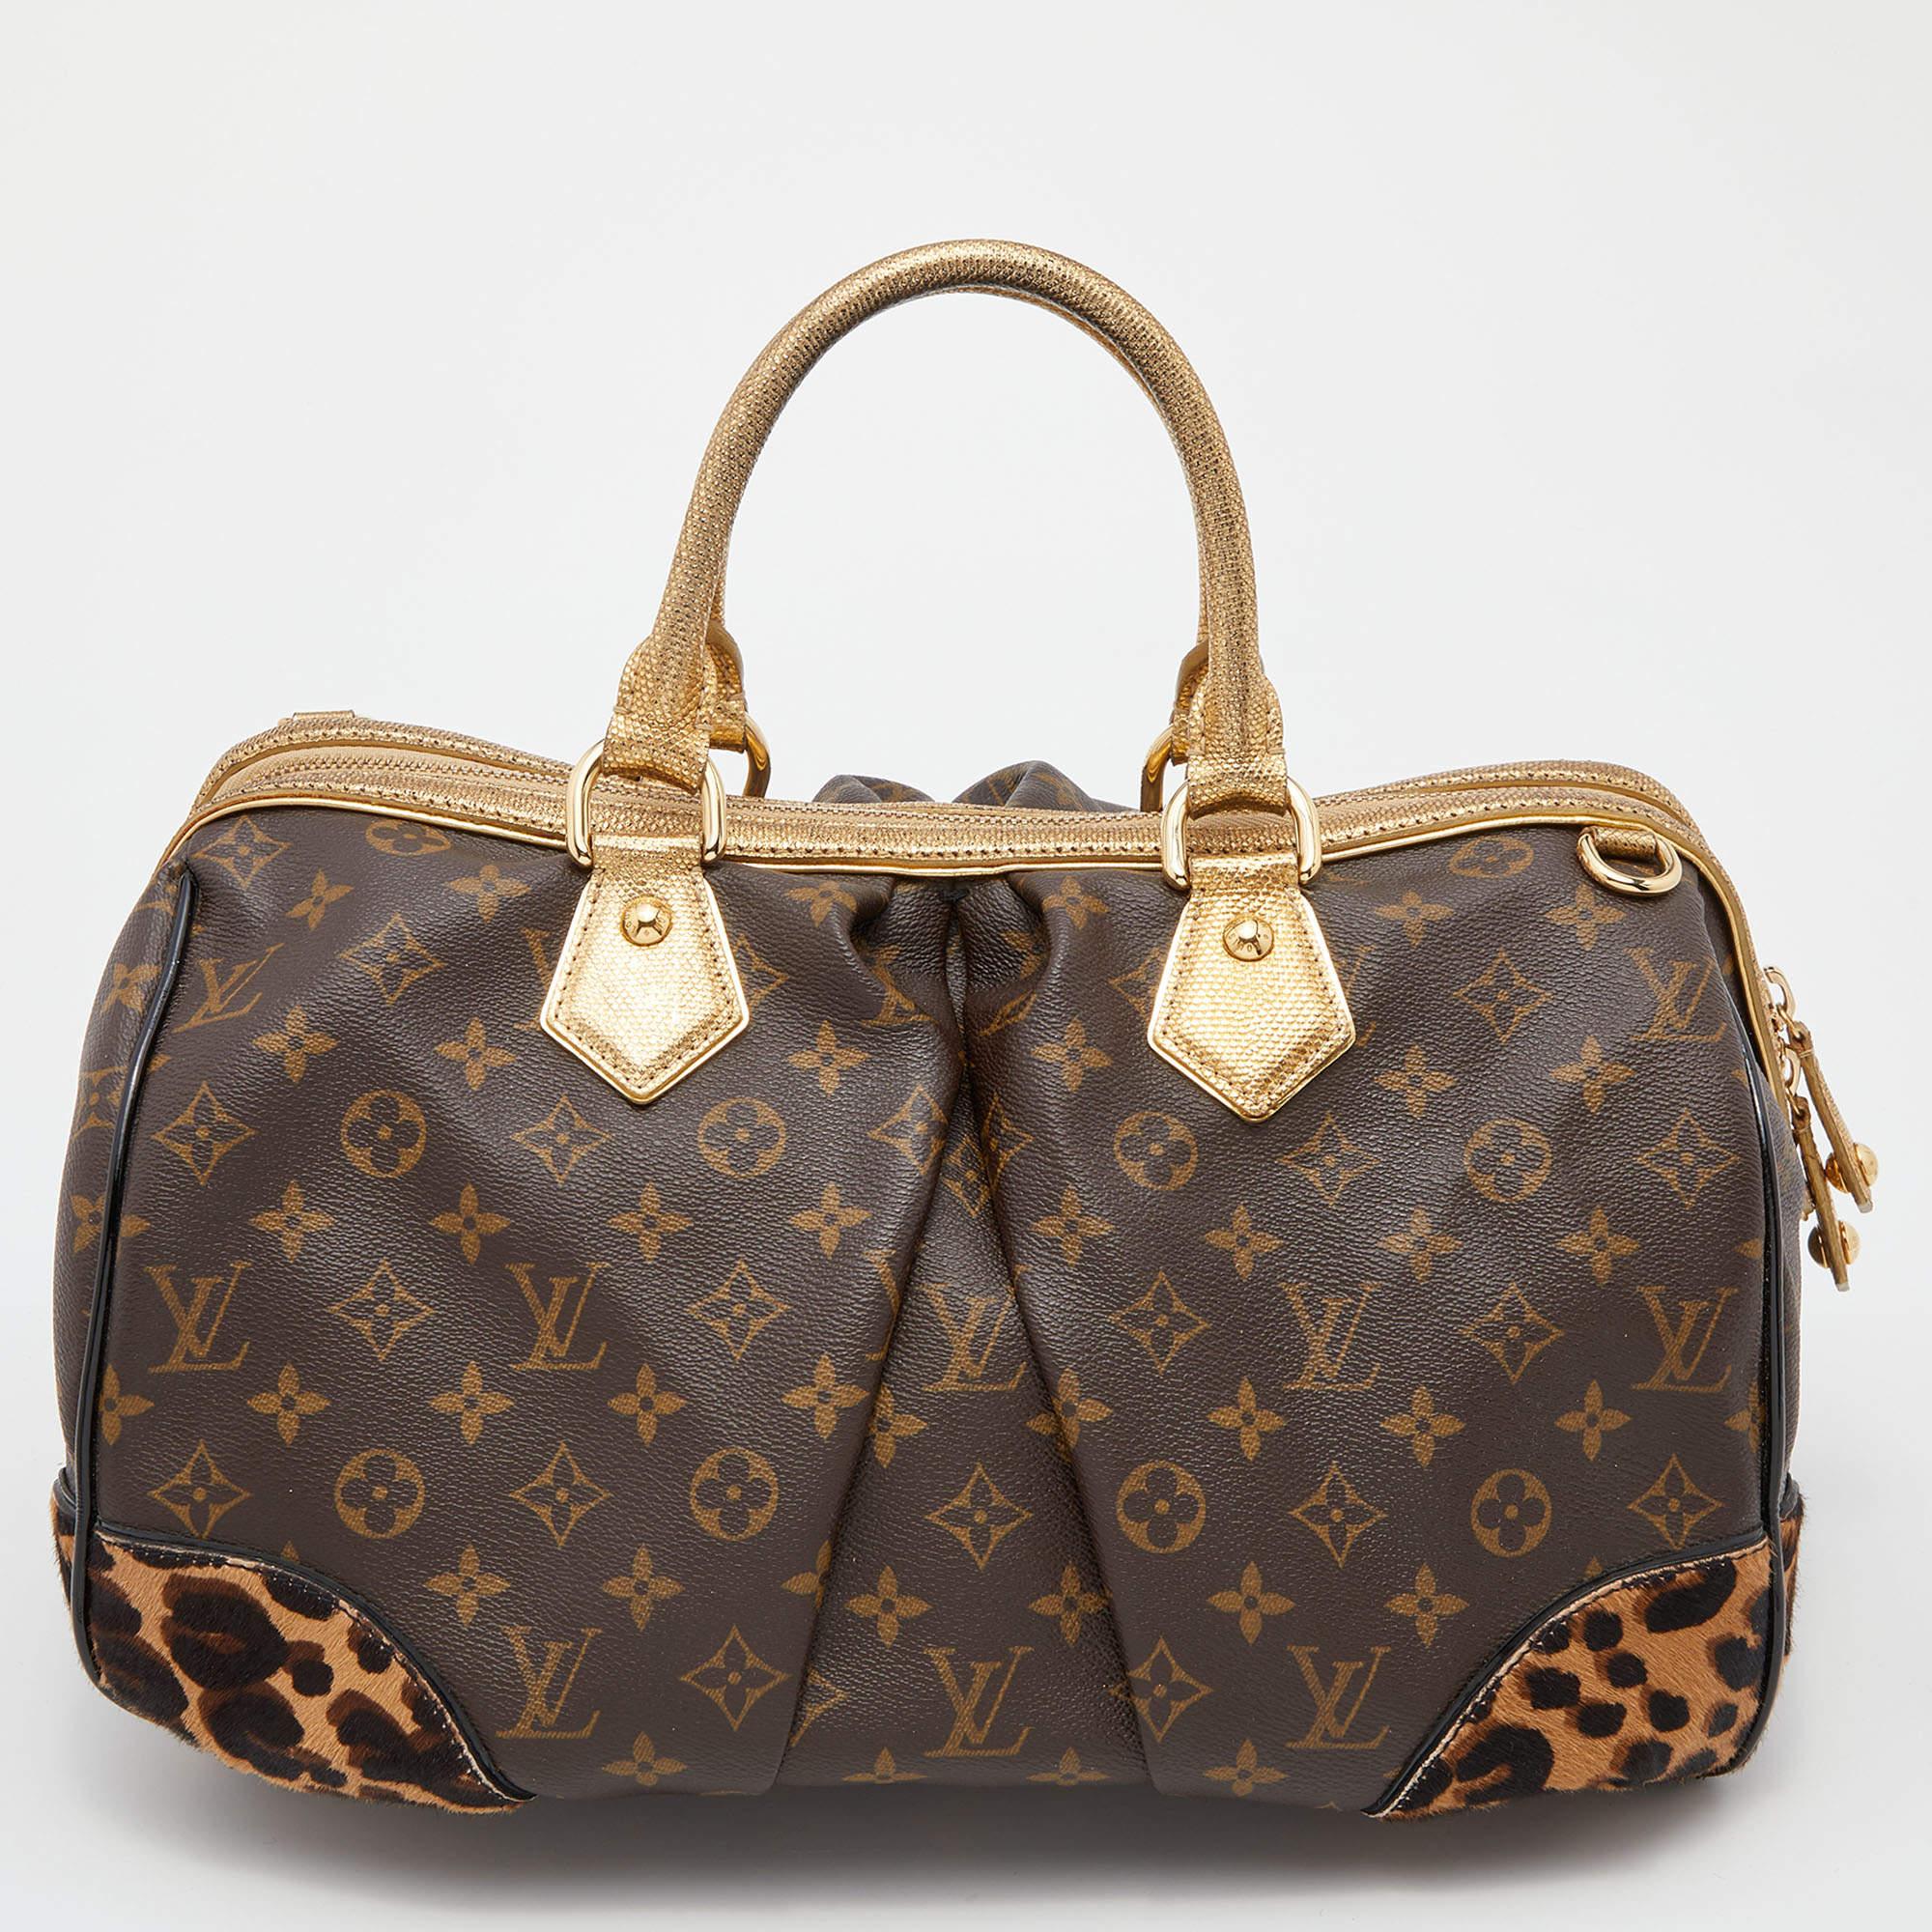 Stylish and durable, this limited edition Stephen Sprouse bag from Louis Vuitton is a must-have in your closet! Crafted from signature monogram canvas and Leopard print calf hair, the bag features dual handles and protective metal feet at the